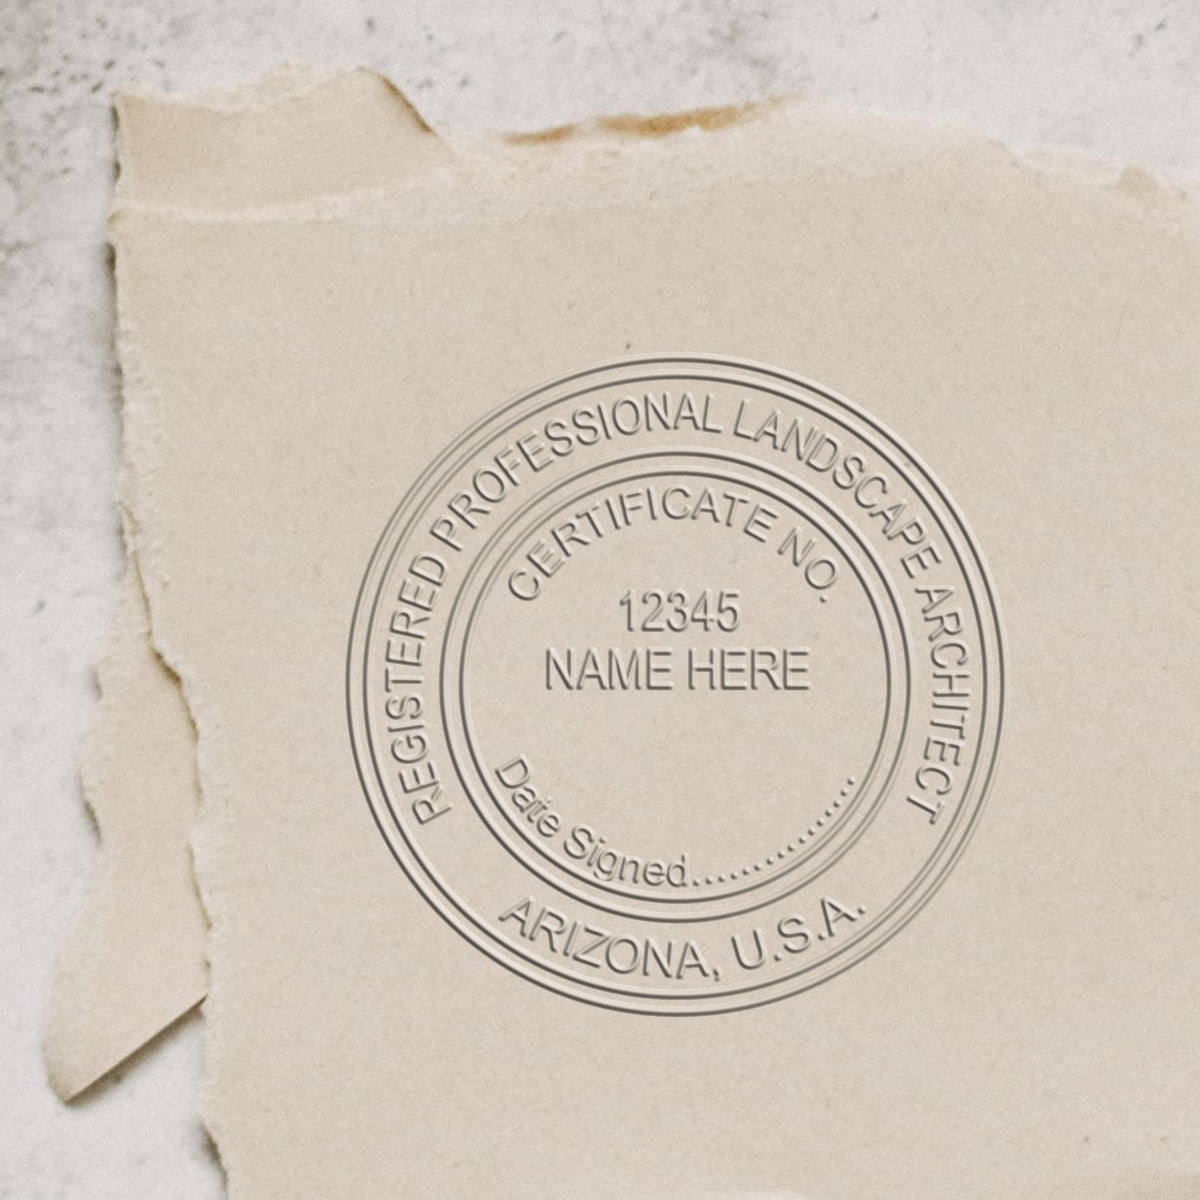 An in use photo of the Hybrid Arizona Landscape Architect Seal showing a sample imprint on a cardstock